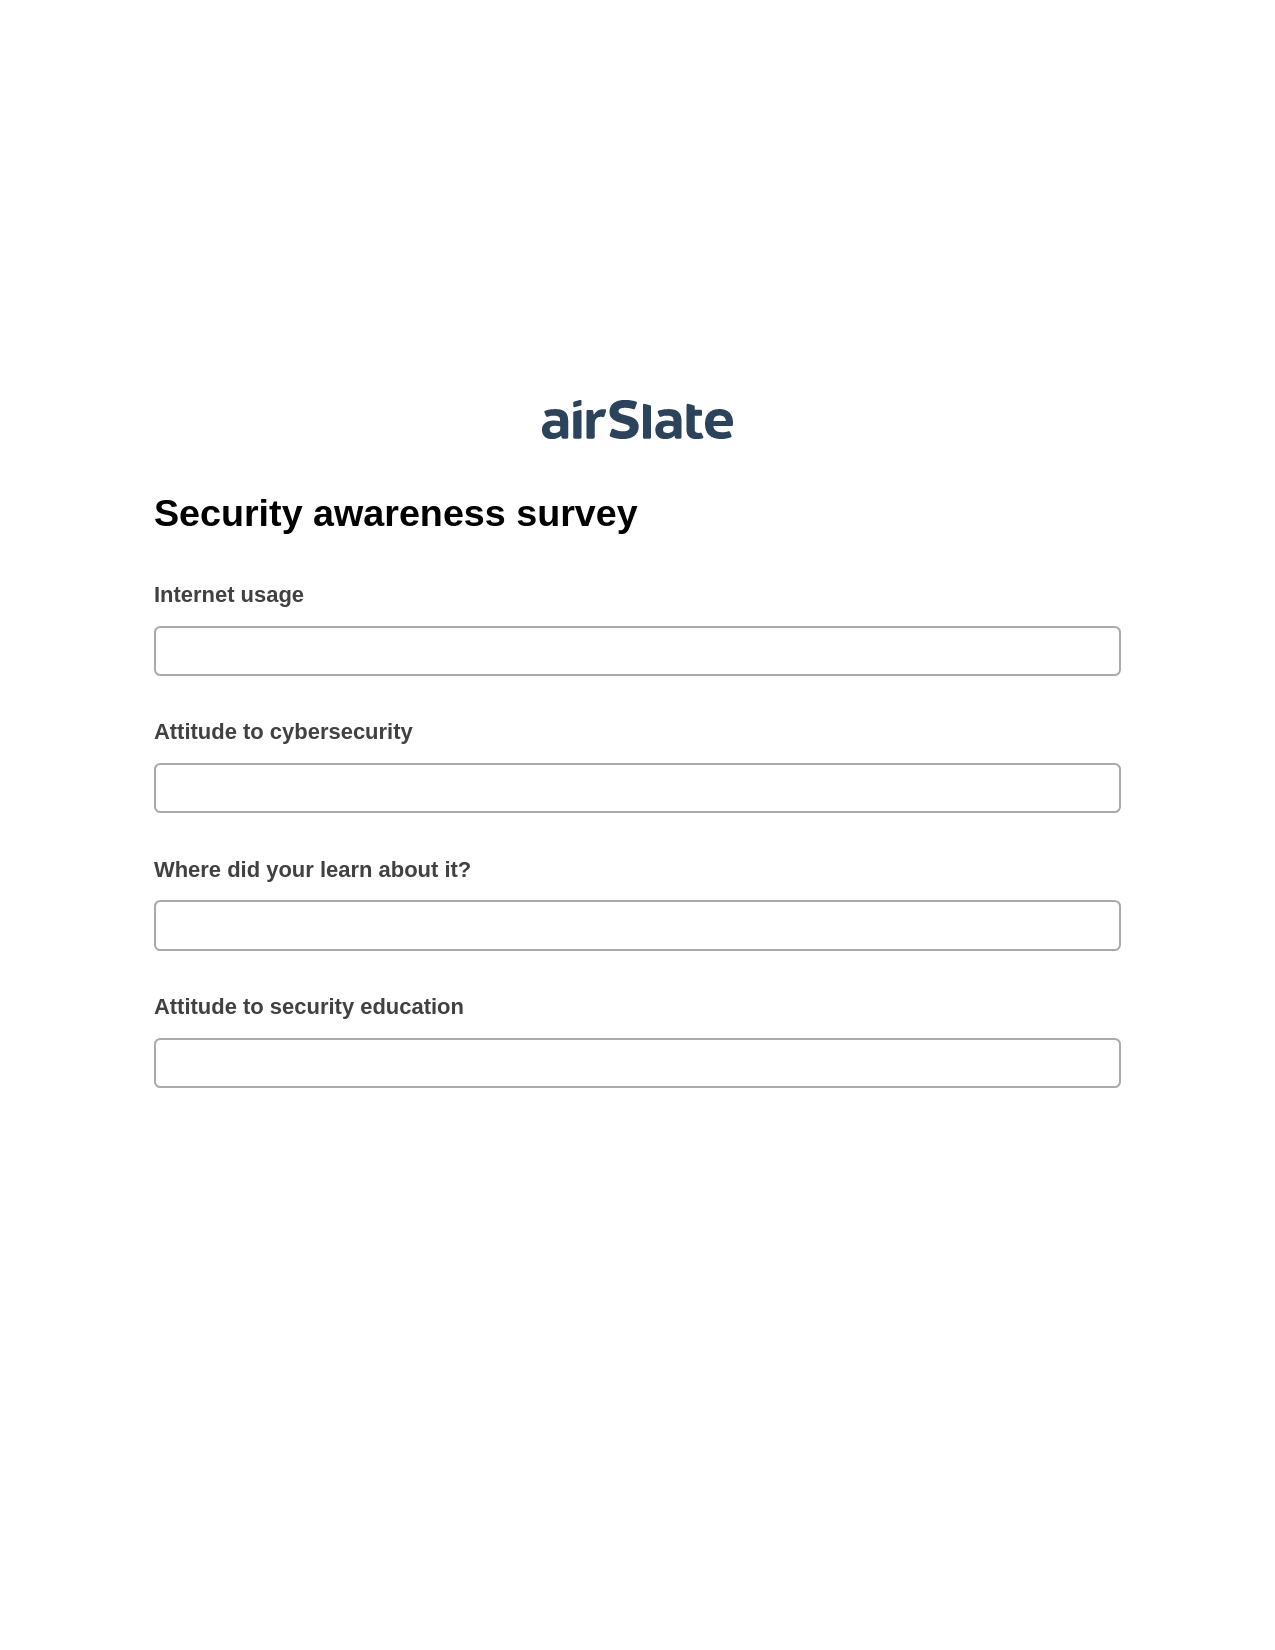 Security awareness survey Pre-fill from MySQL Dropdown Options Bot, Lock the slate bot, Post-finish Document Bot